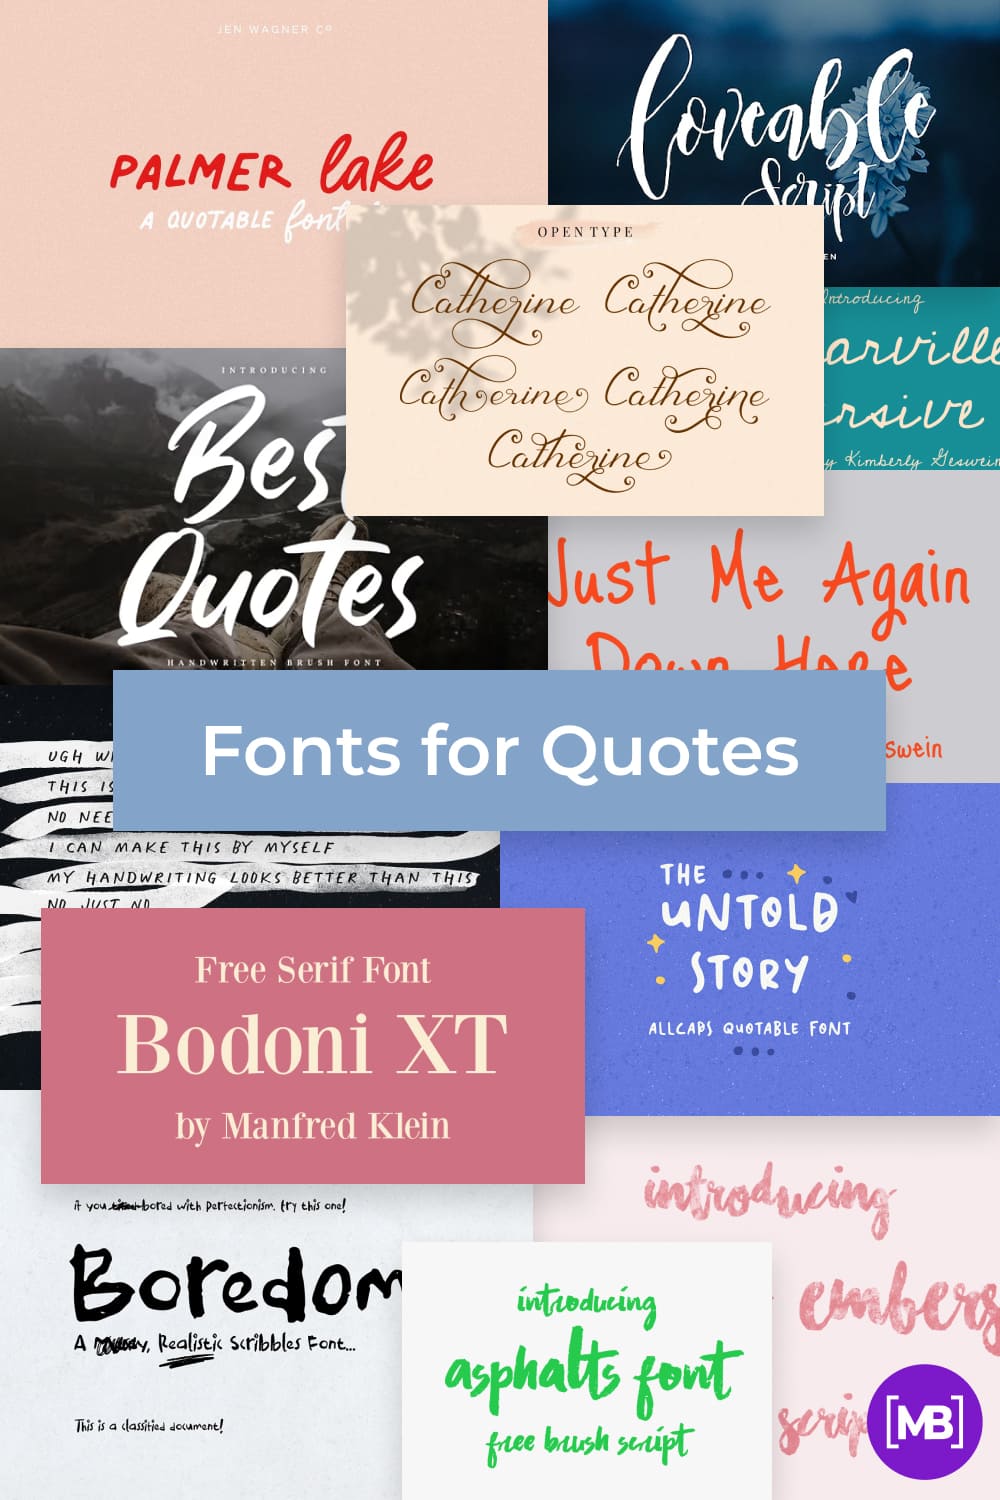 Fonts for Quotes Pinterest.